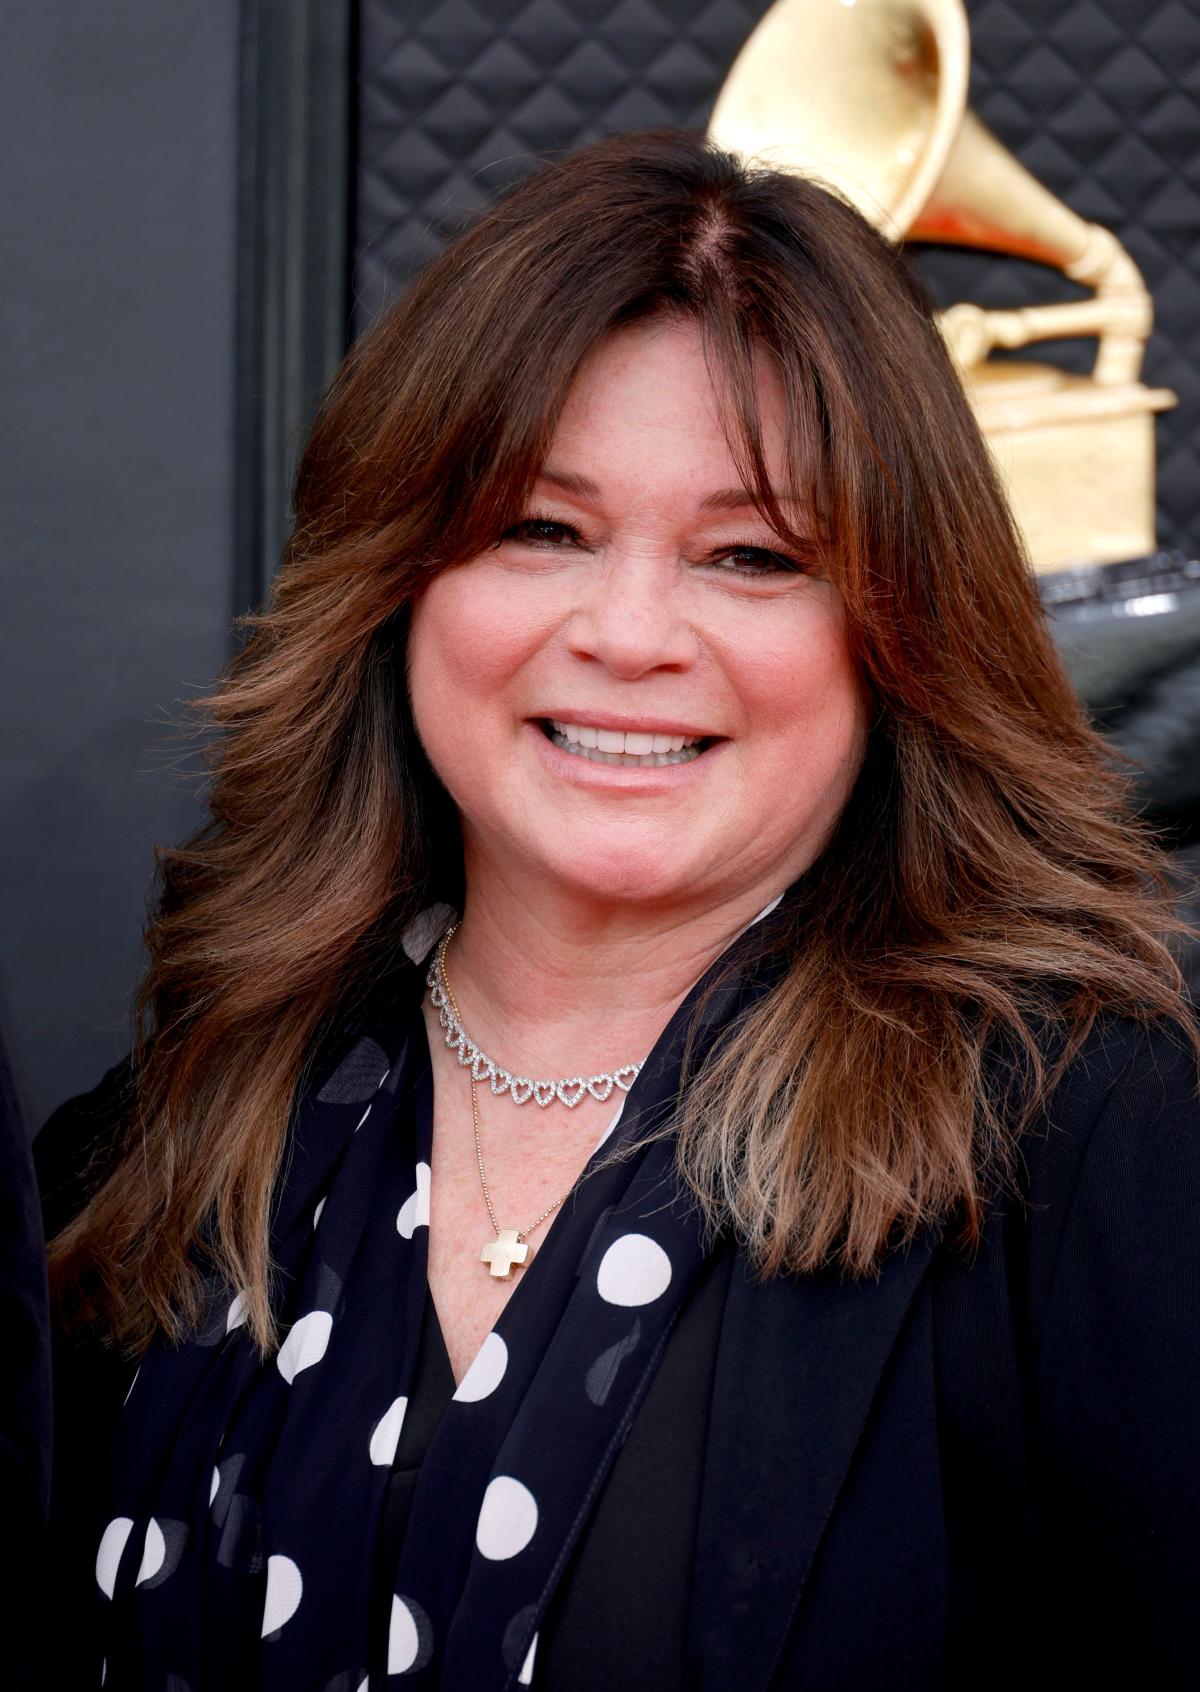 Valerie Bertinelli Reveals Cancellation Of Cooking Show One Of The 